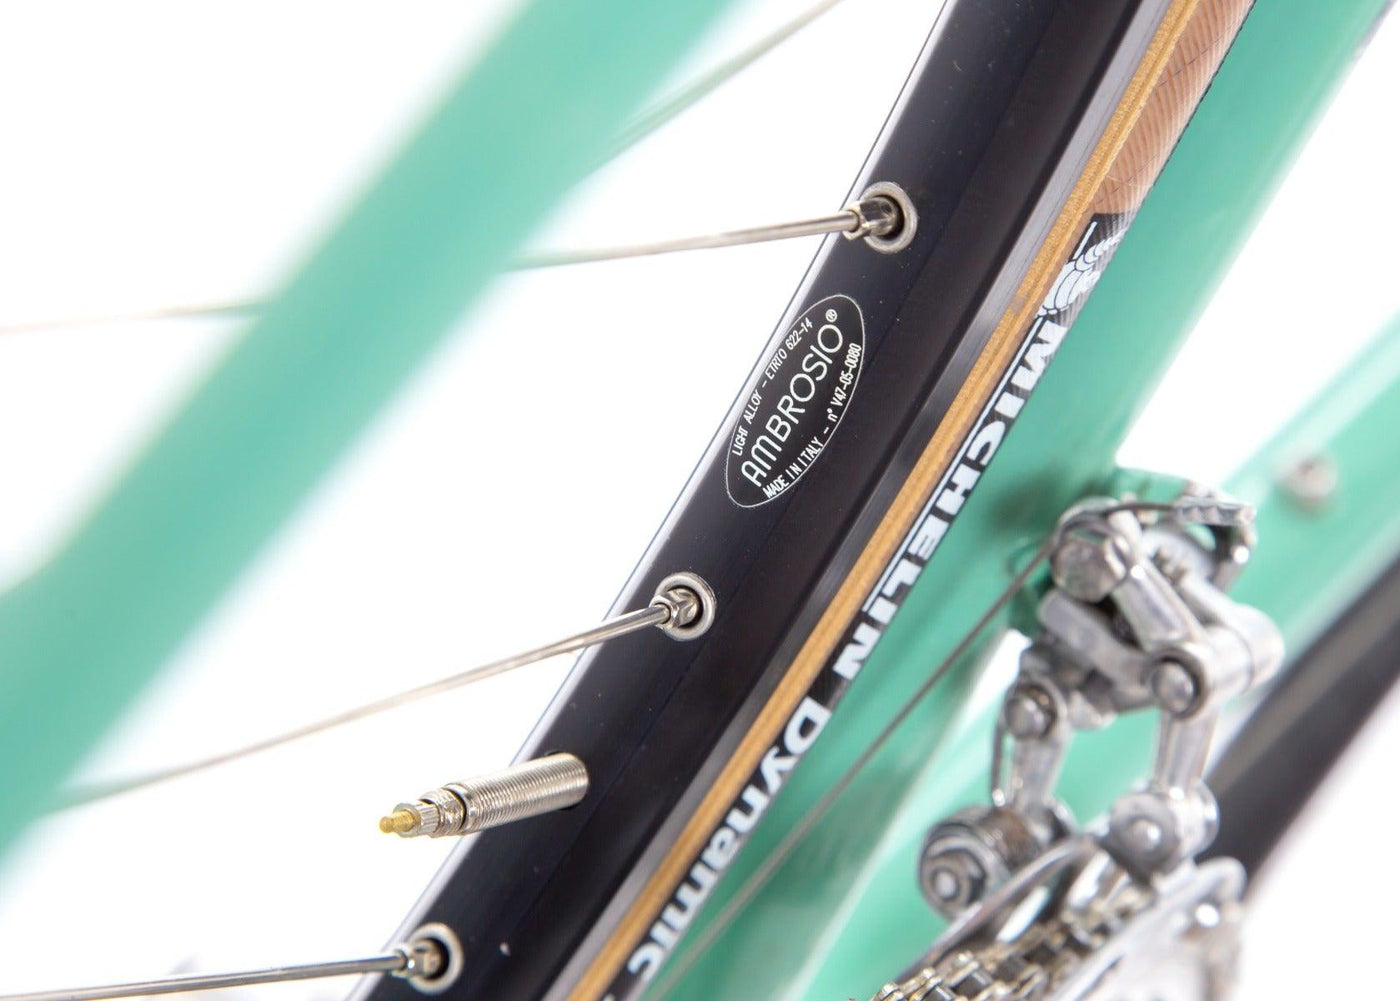 Bianchi Specialissima X3 Iconic Road Bicycle 1983 - Steel Vintage Bikes